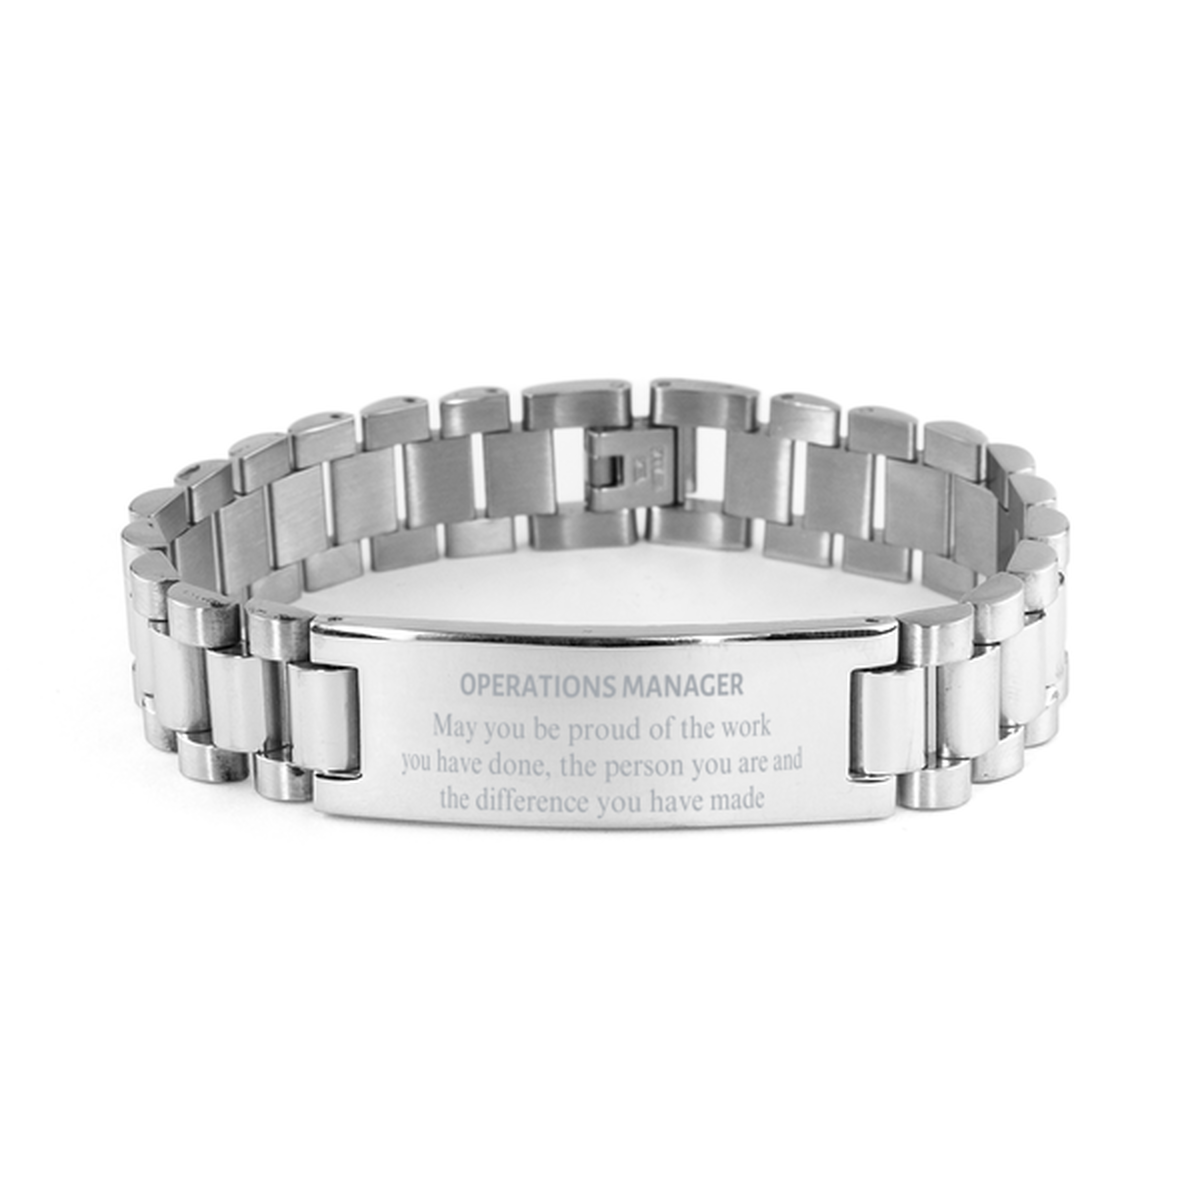 Operations Manager May you be proud of the work you have done, Retirement Operations Manager Ladder Stainless Steel Bracelet for Colleague Appreciation Gifts Amazing for Operations Manager